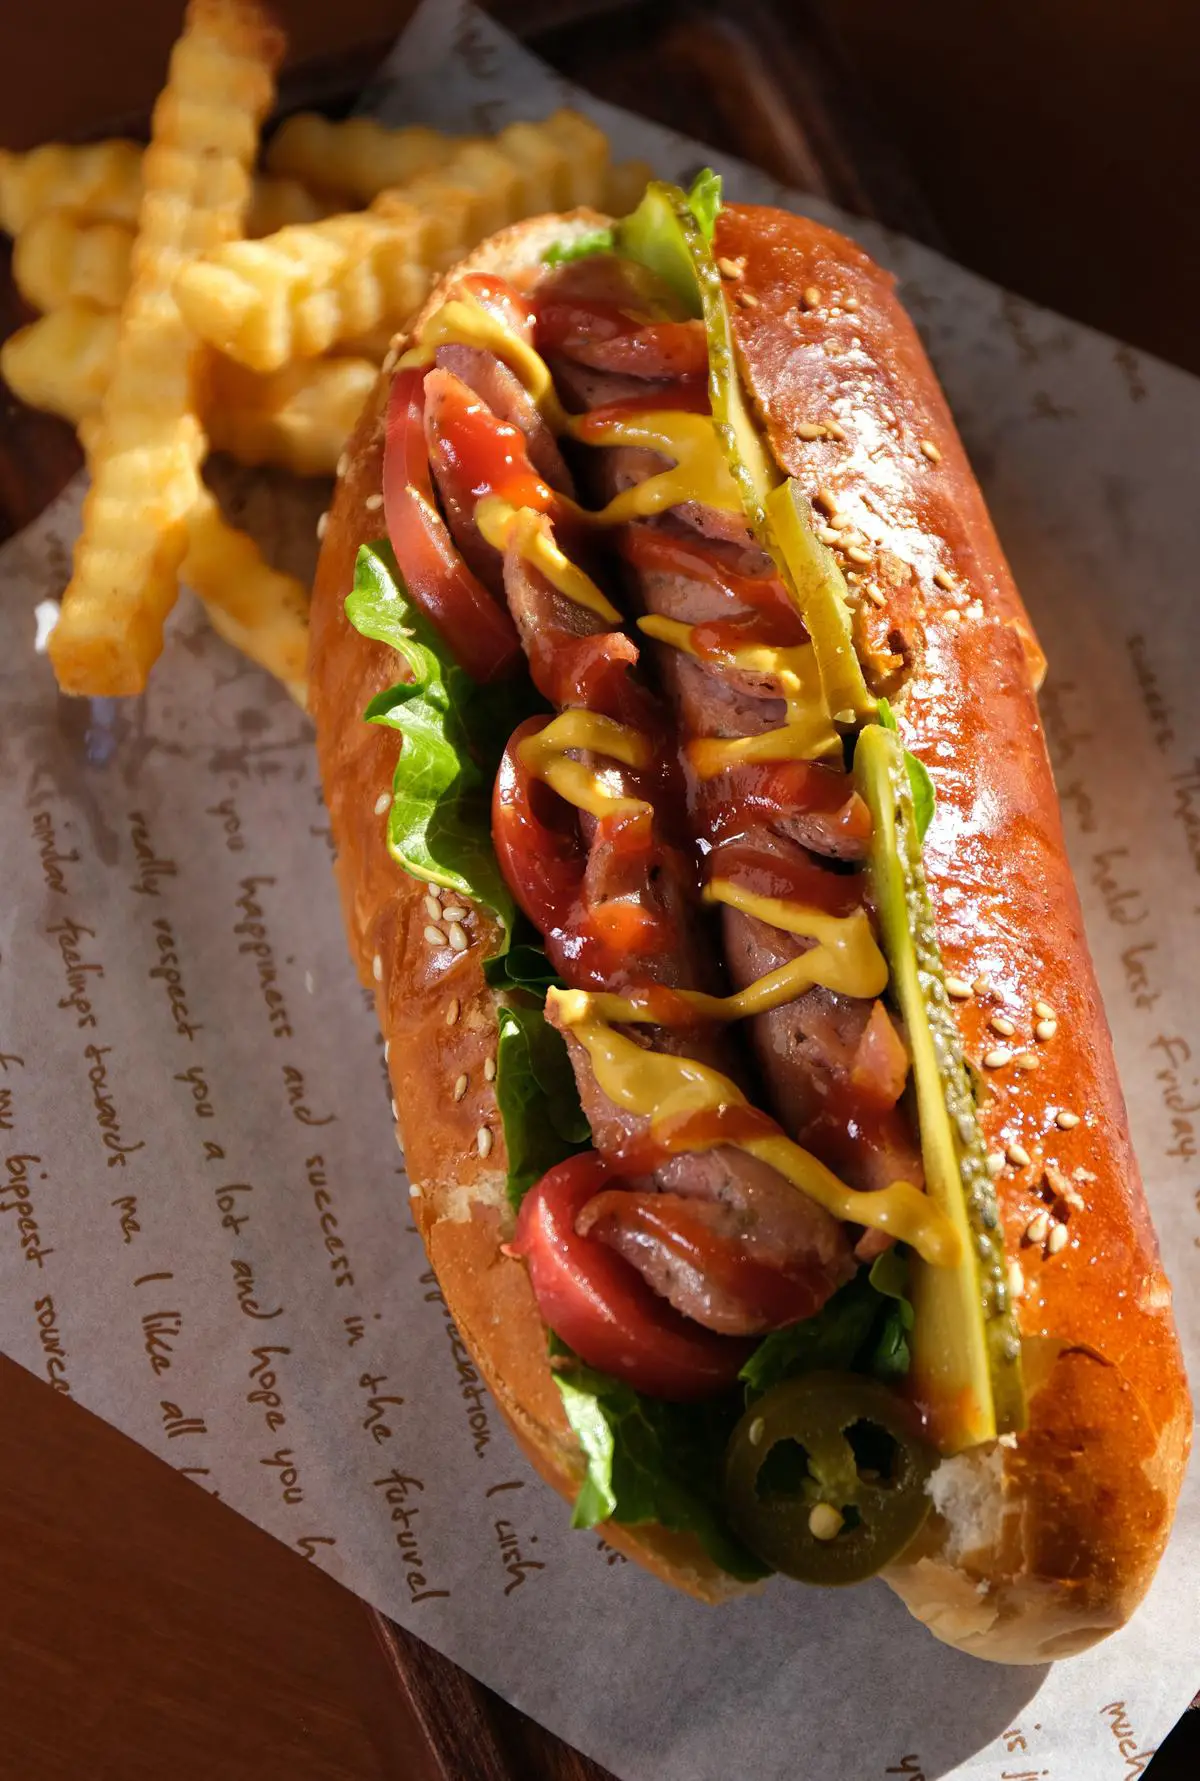 The image shows a delicious hot dog with mustard and relish served with a cold soda, representing Costco's hot dog-and-soda combo.